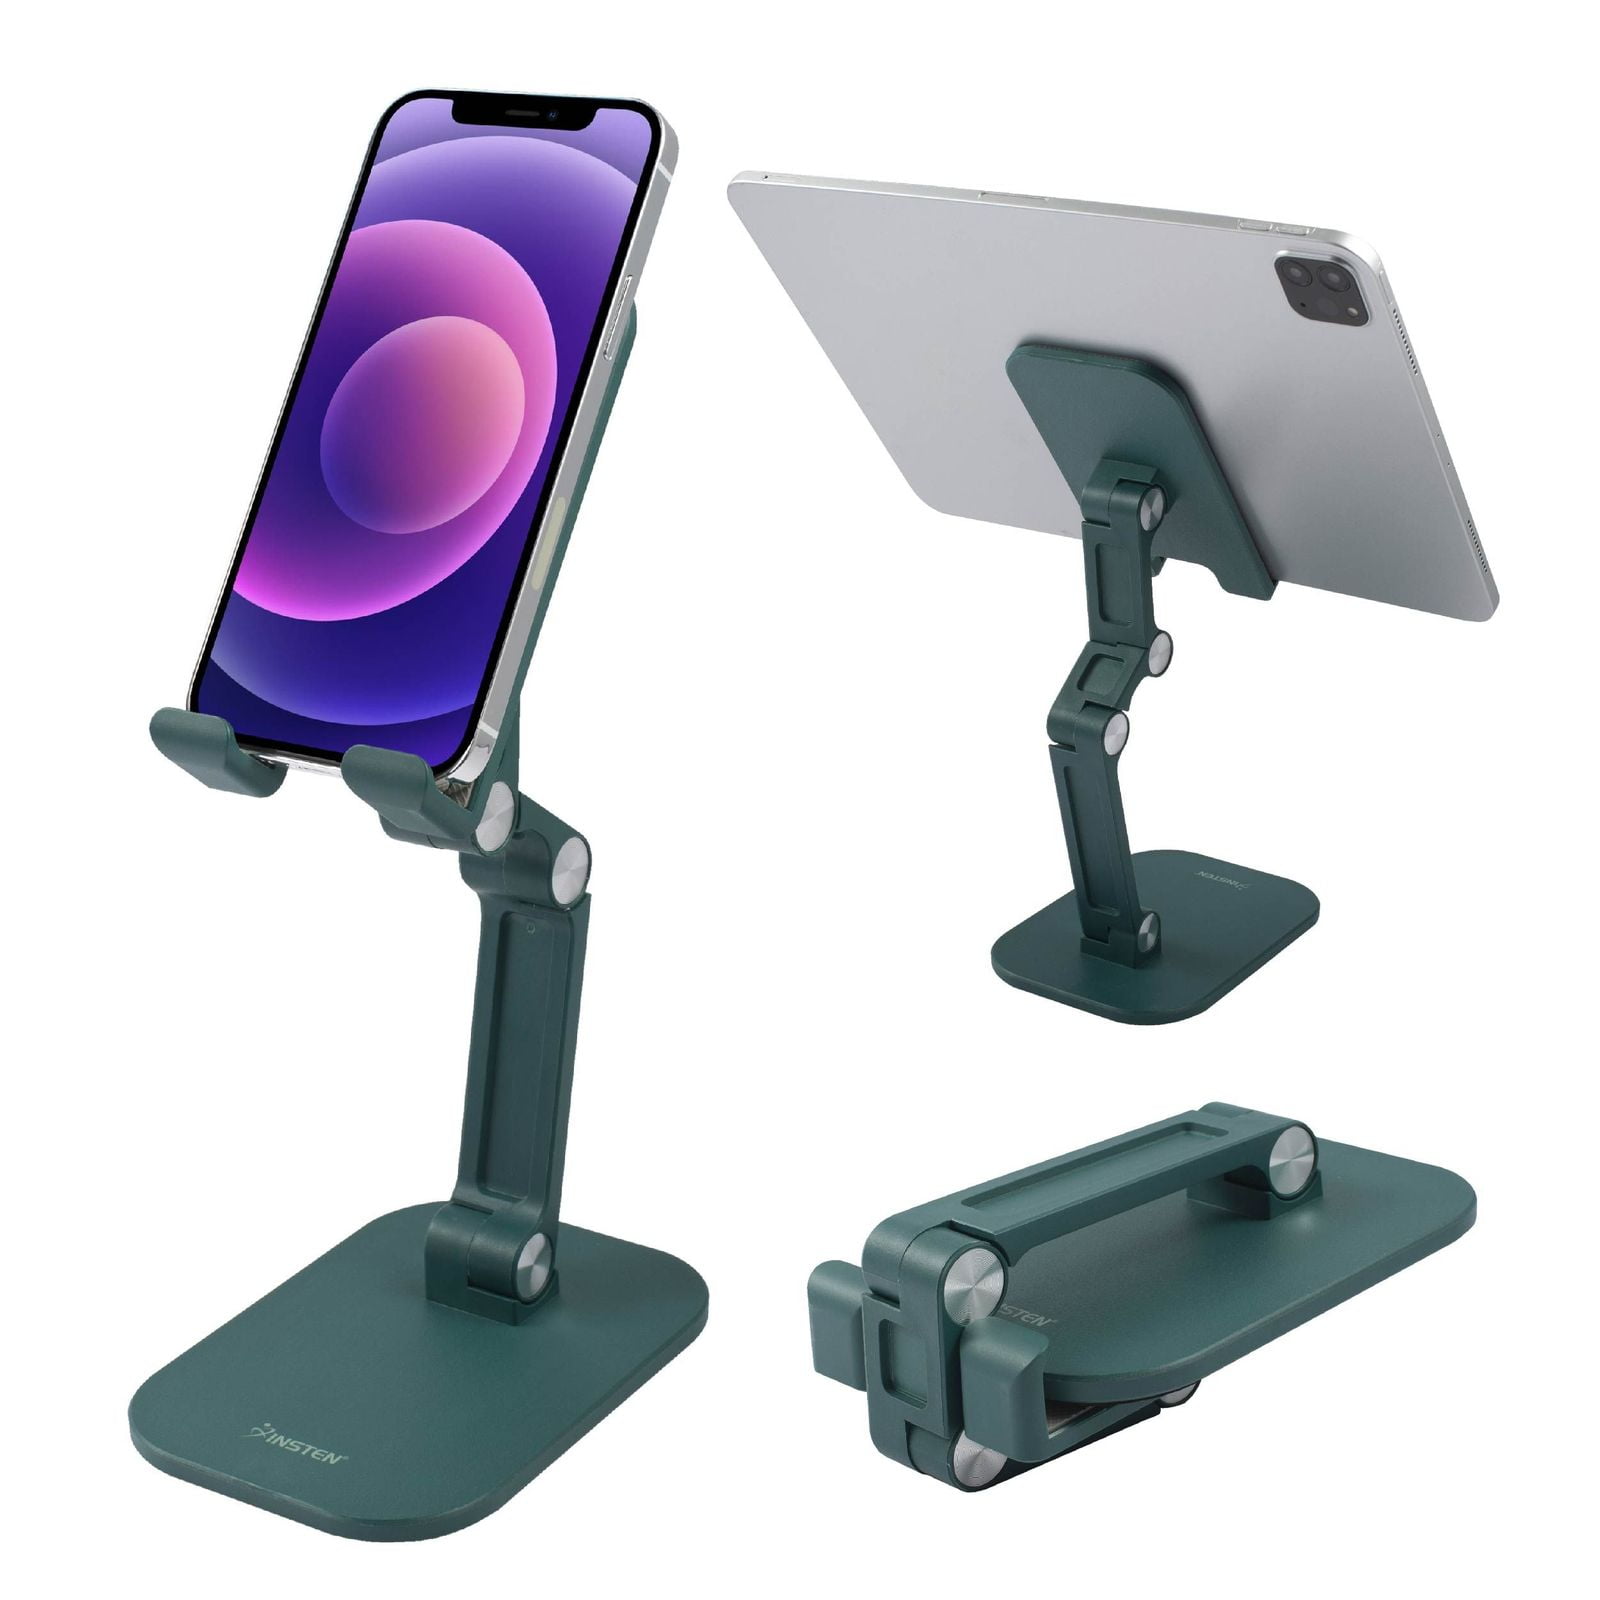 Insten Cell Phone Stand for Desk, Aluminum Foldable Holder, Height & Angle  Adjustable Ergonomic Mount For All Smartphones iPhone iPad Tablet Nintendo  